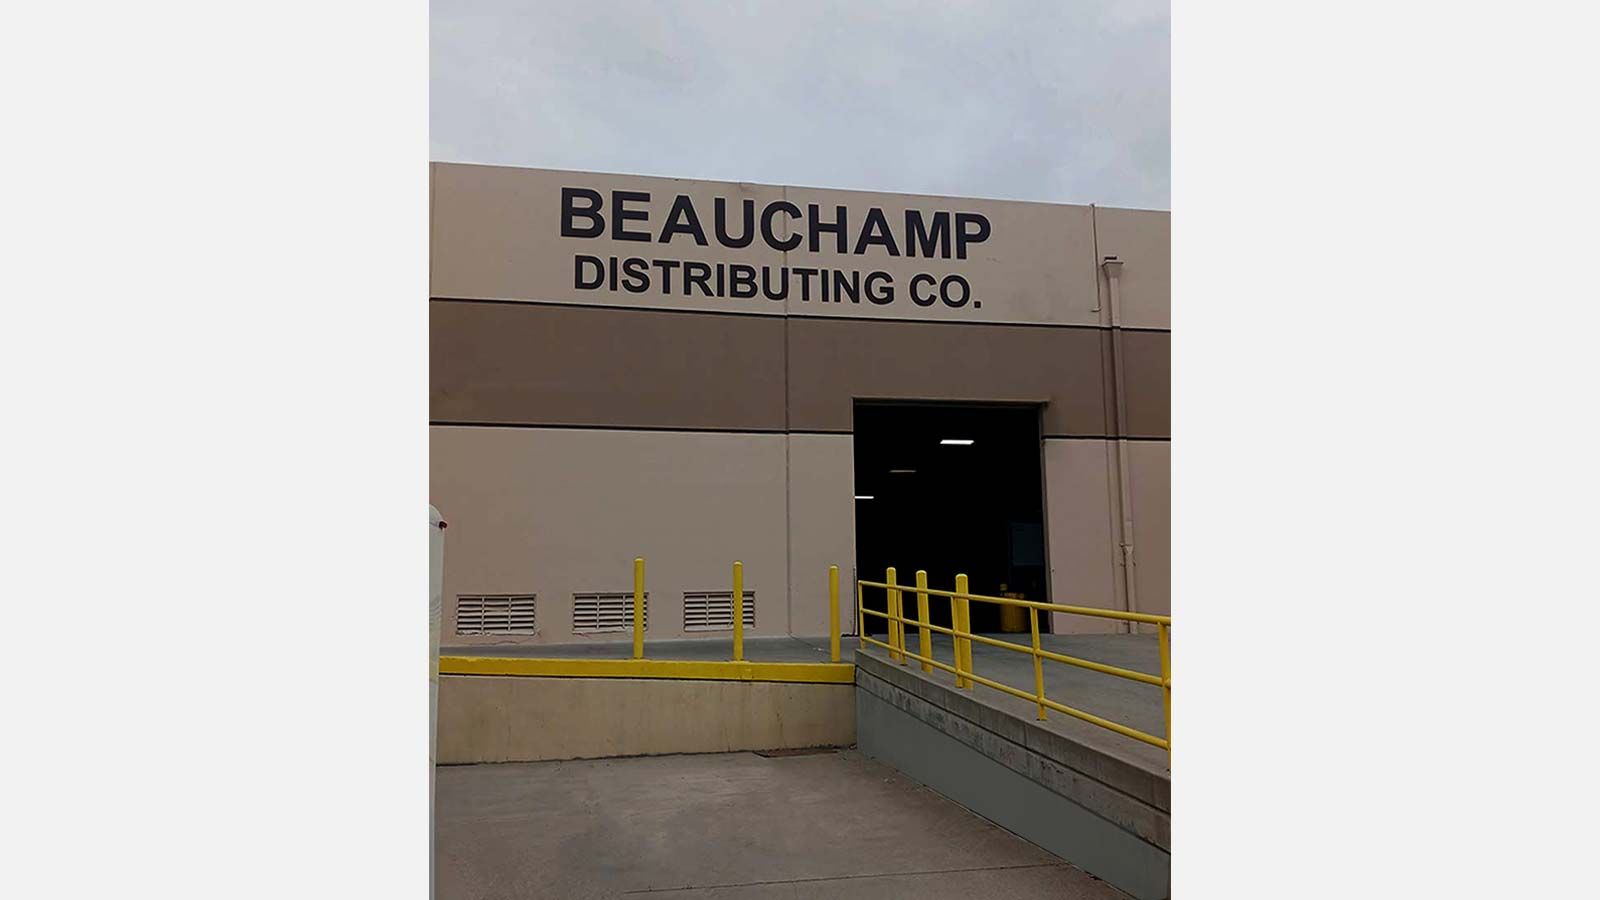 Beauchamp Distributing Company PVC sign on the building